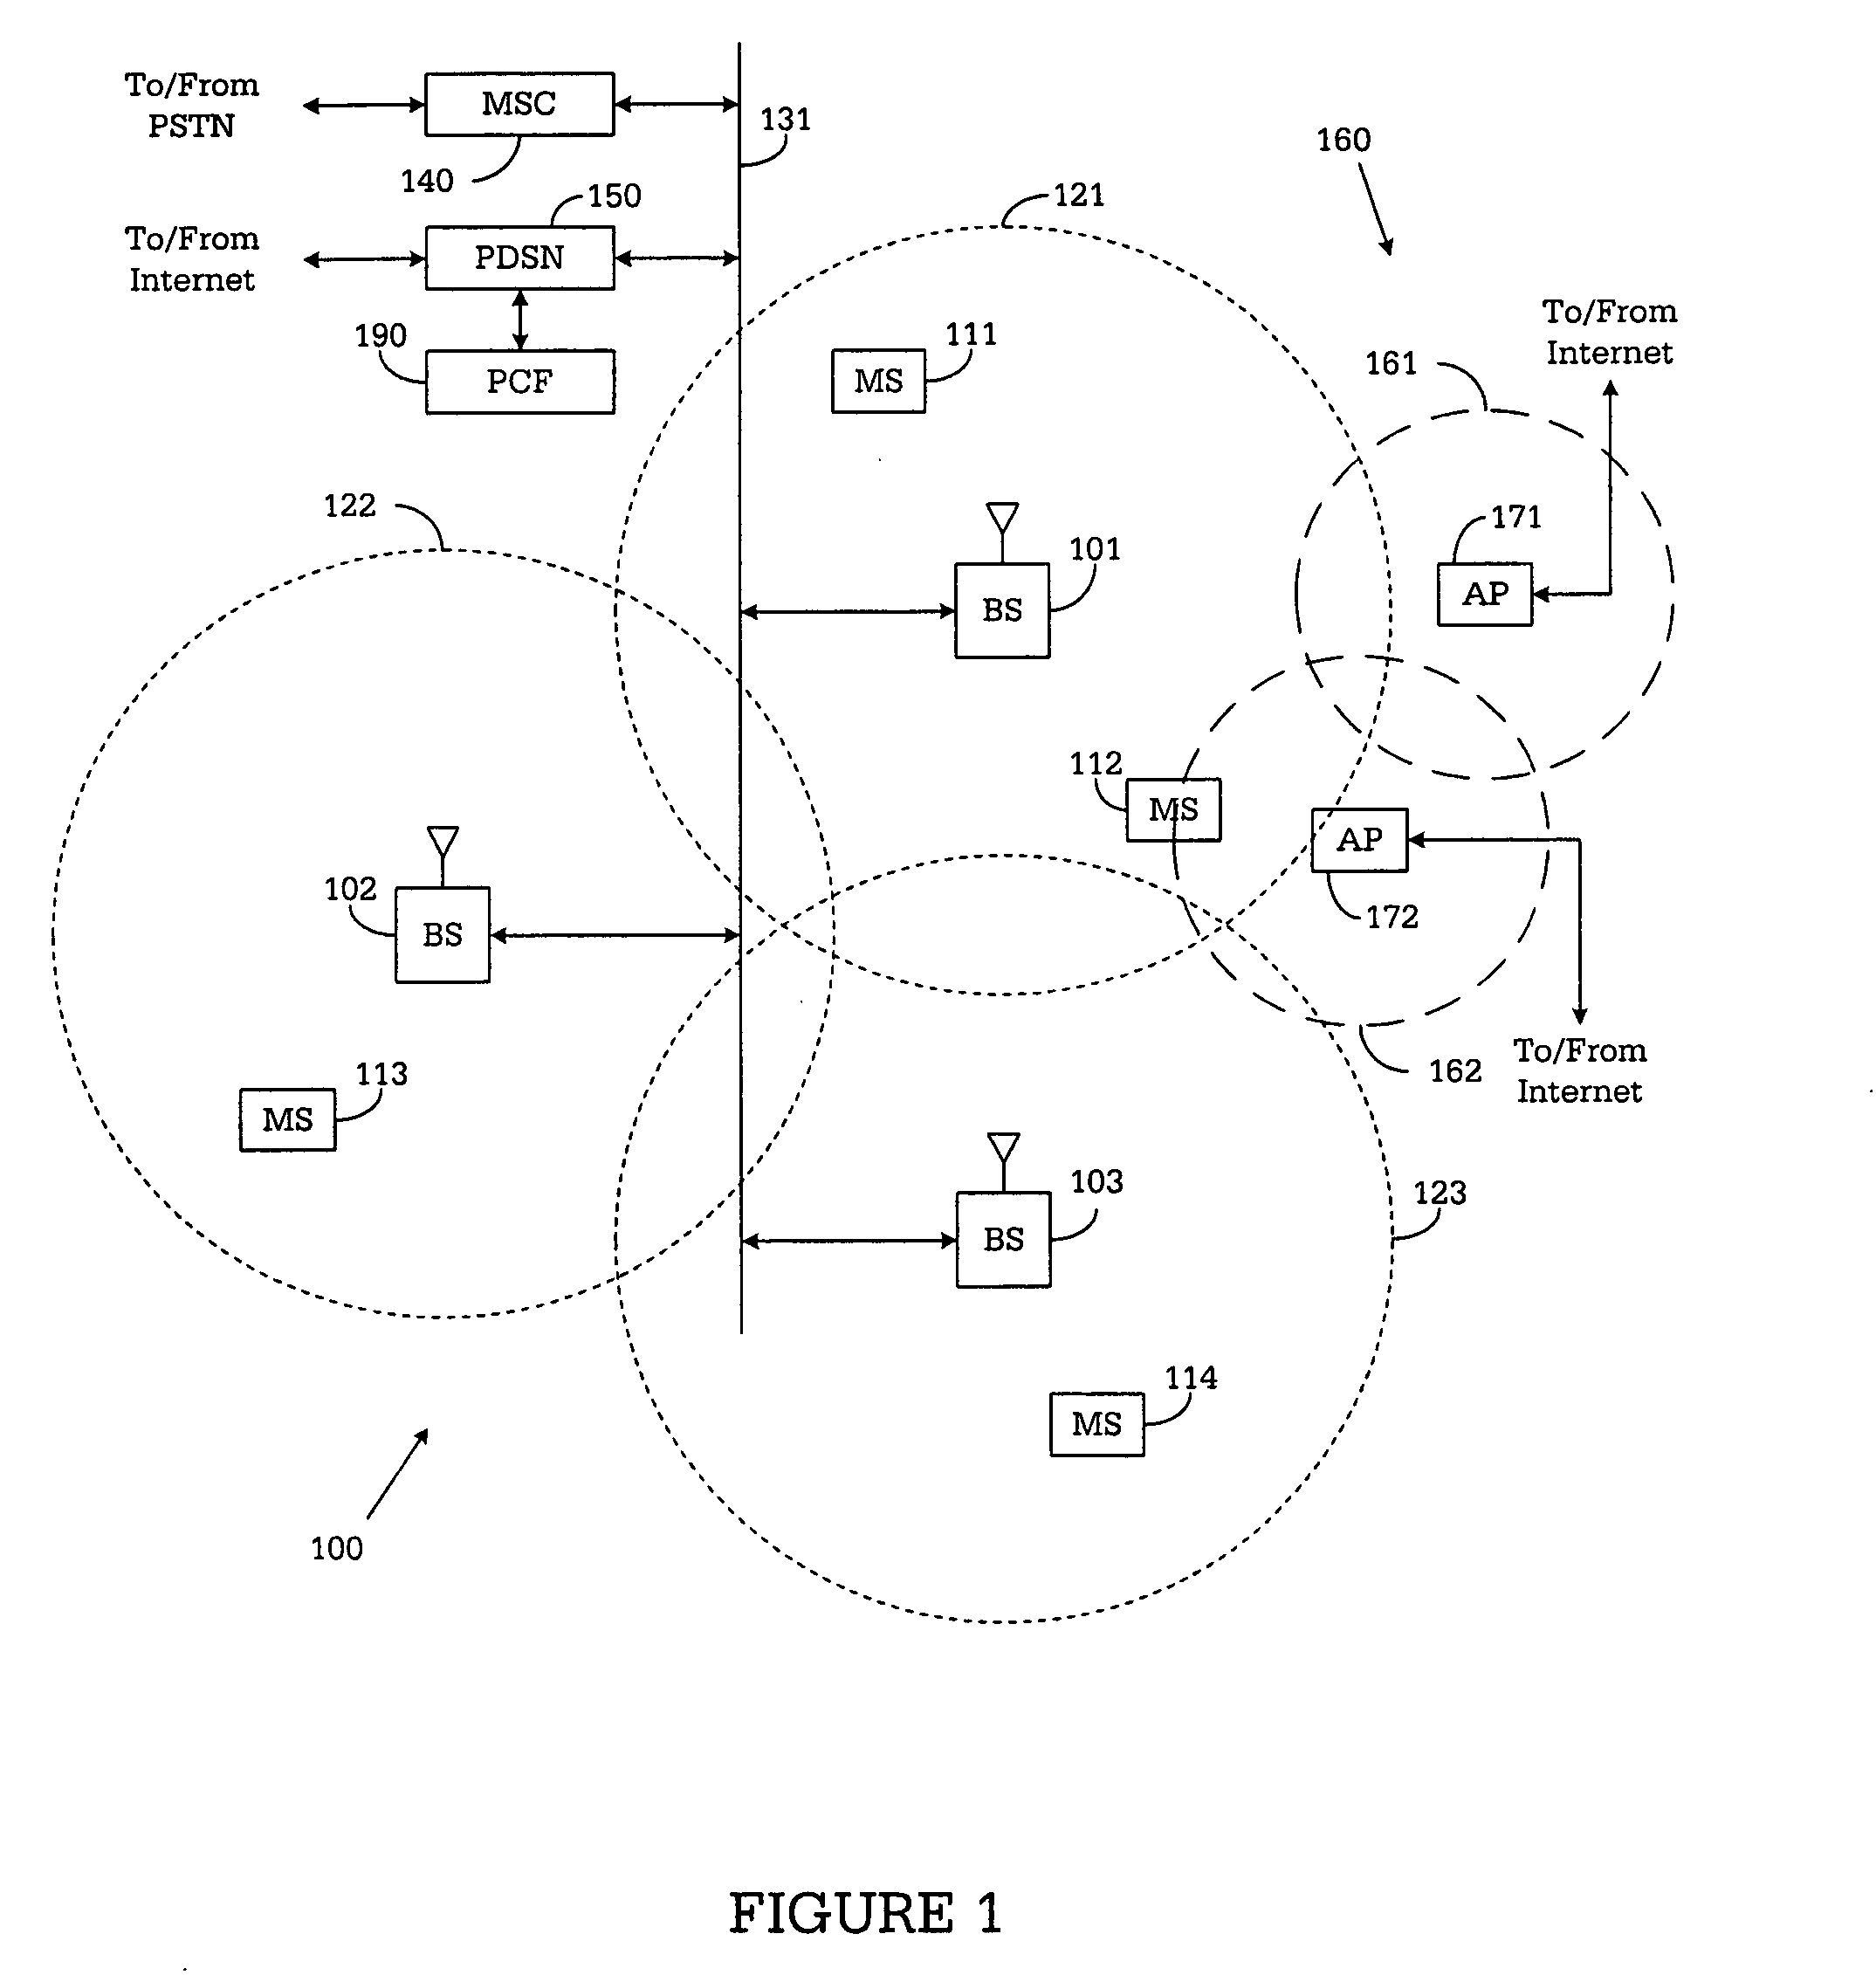 Apparatus and method for interworking CDMA2000 networks and wireless local area networks